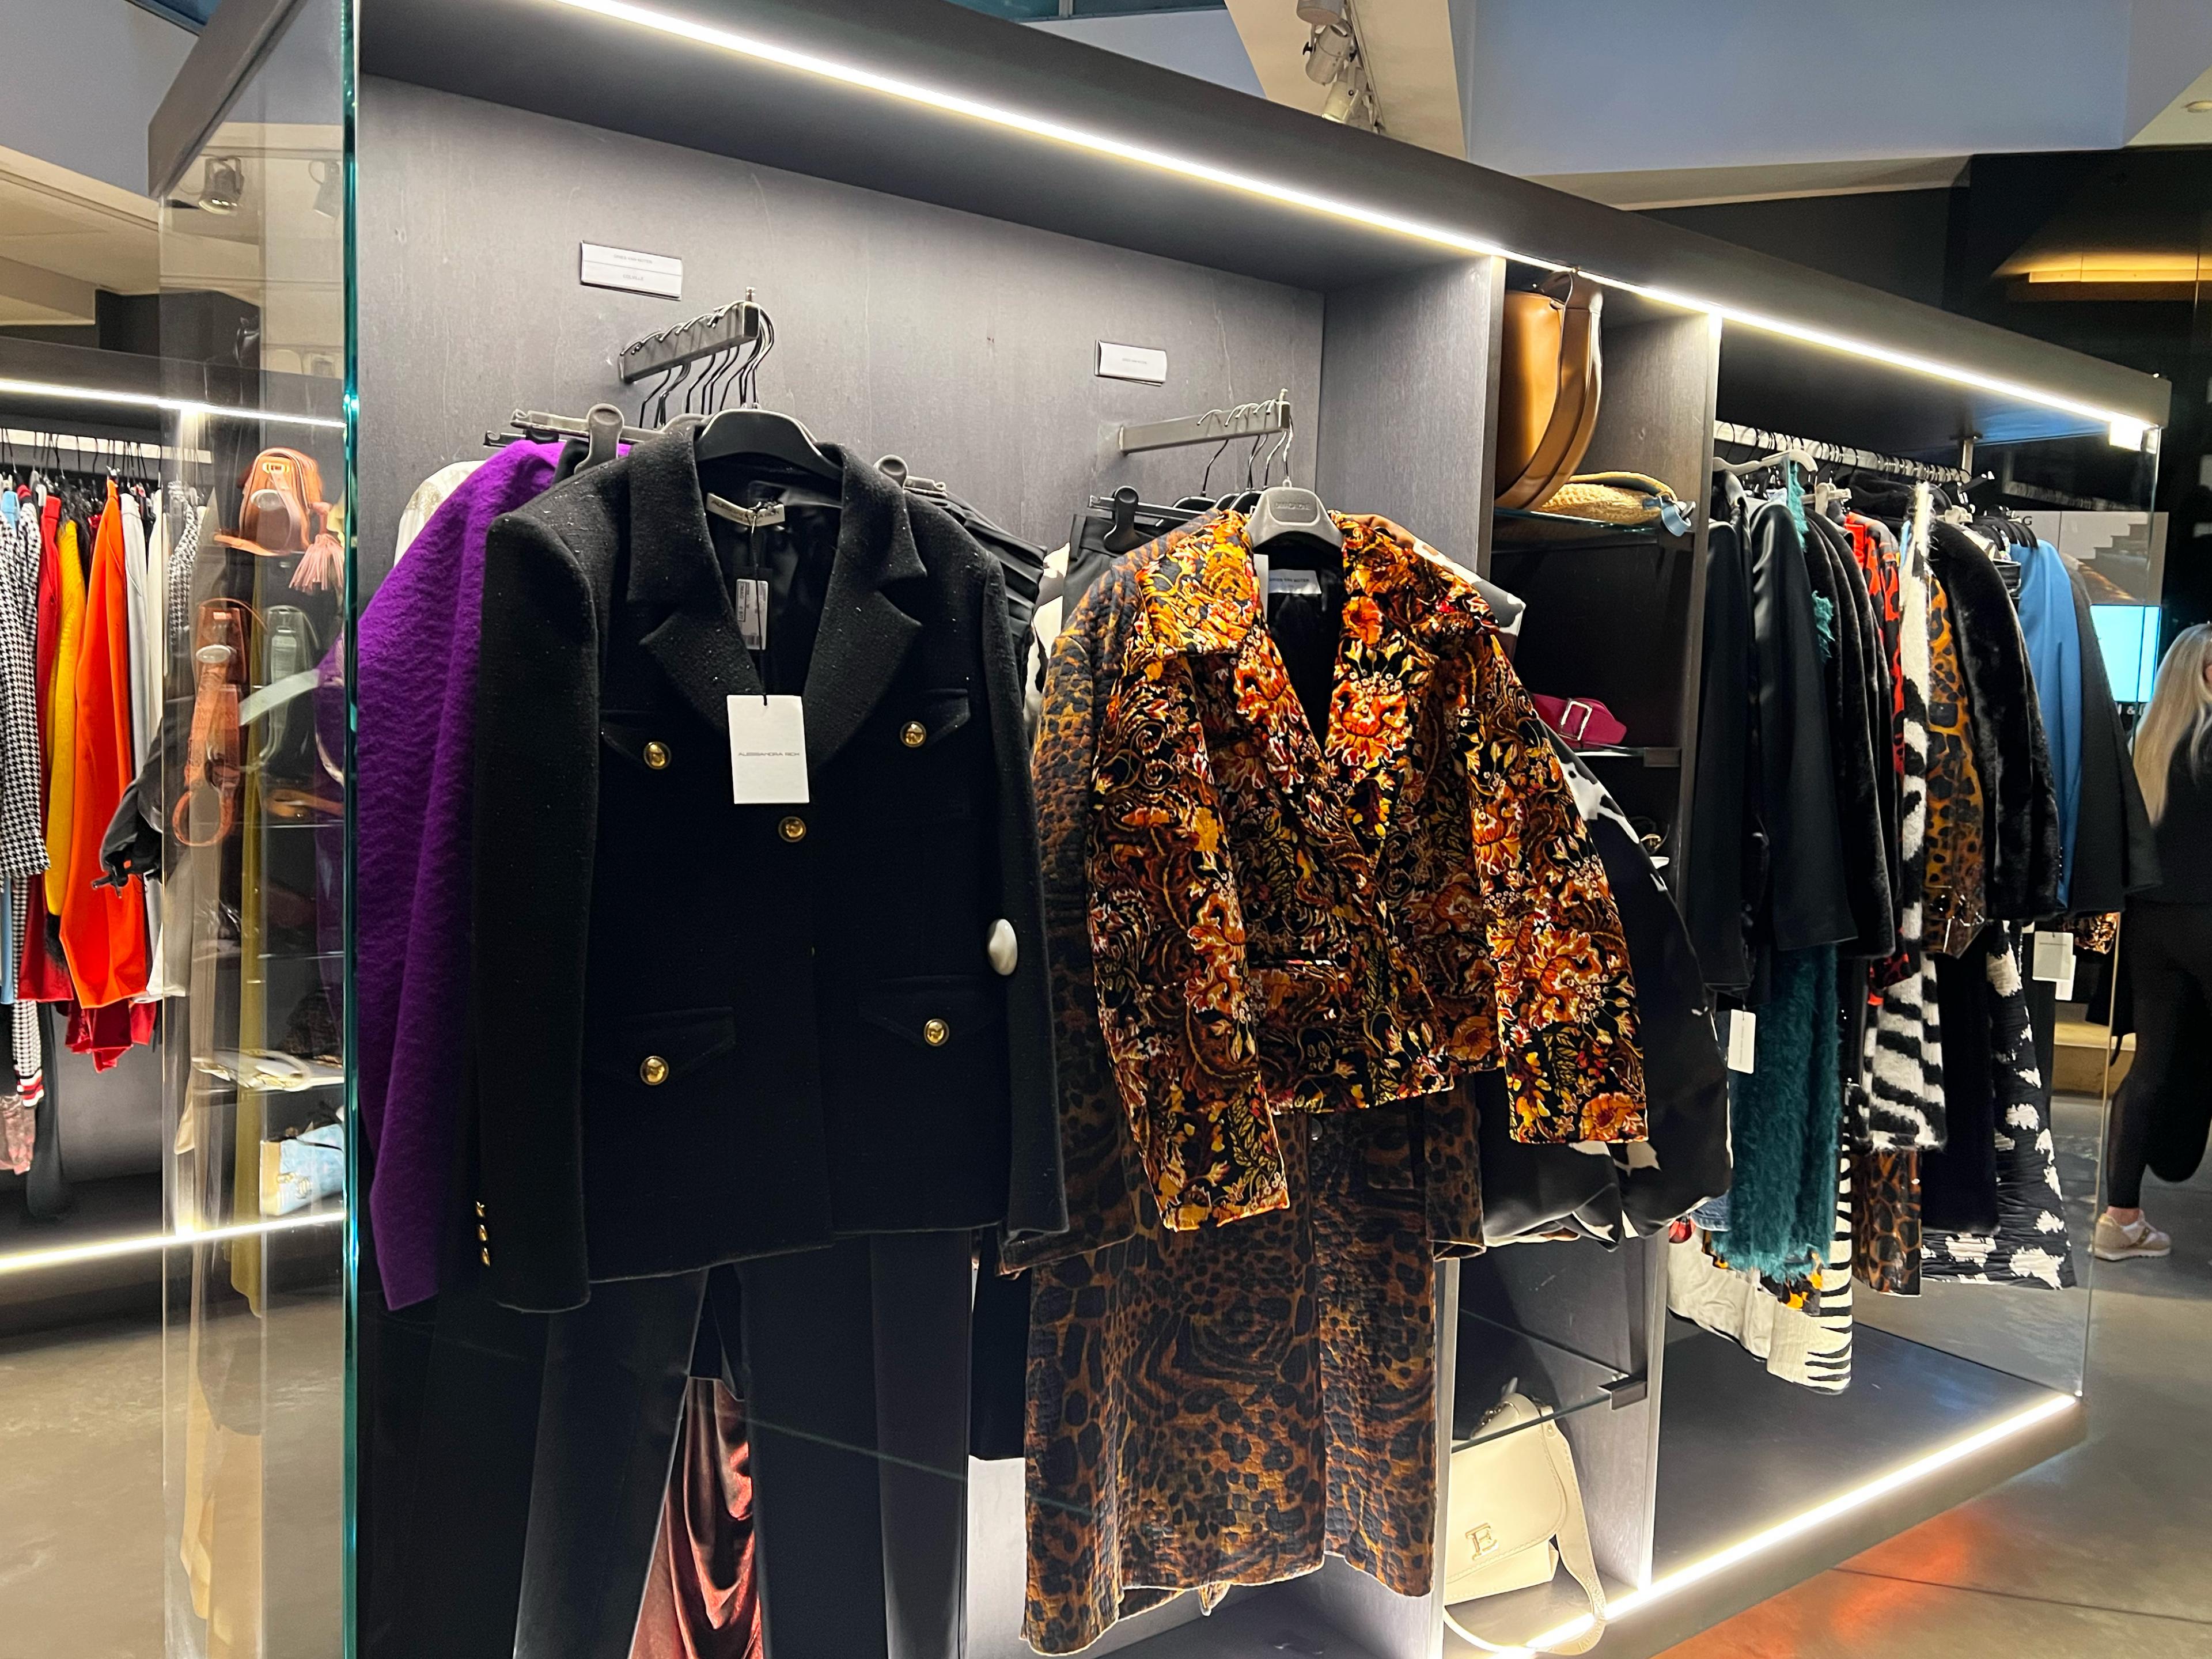 clothing store interior with vintage, colorful clothing on racks